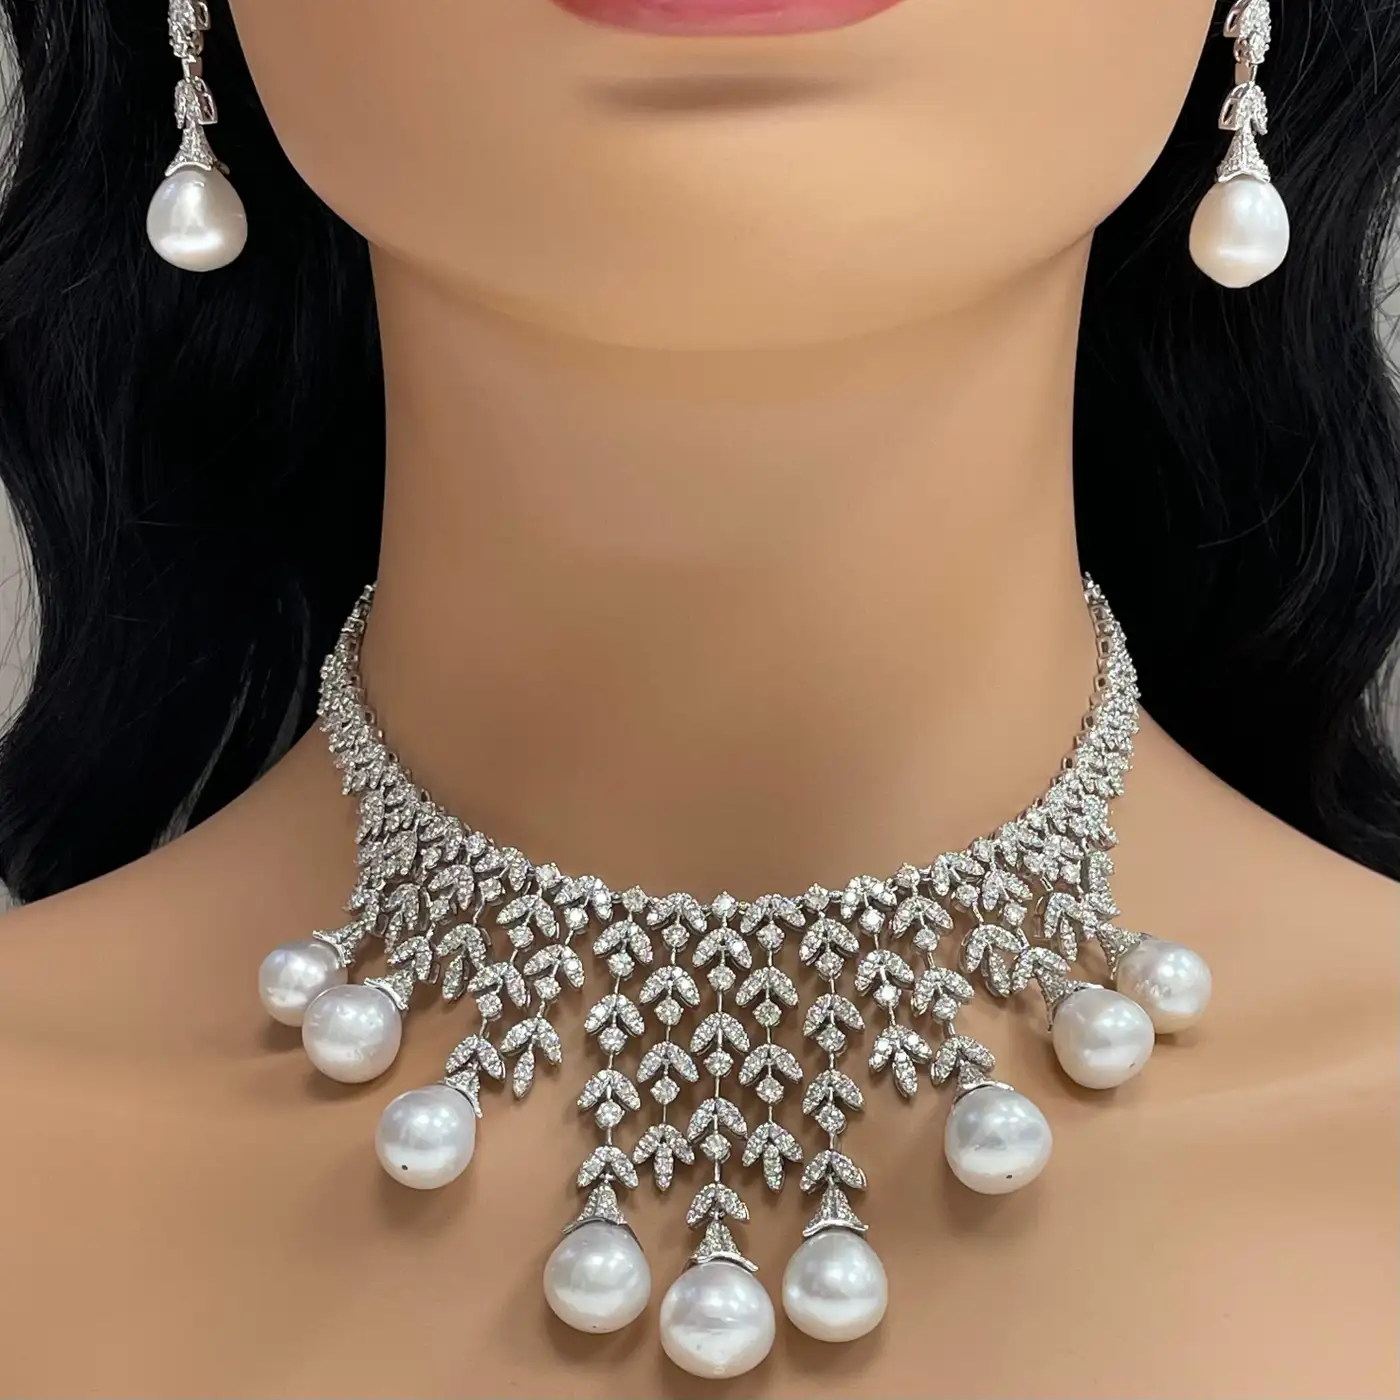 Beauvince-Diamond-and-South-Sea-Pearls-Necklace-and-Earrings-Suite-in-White-Gold-8.webp